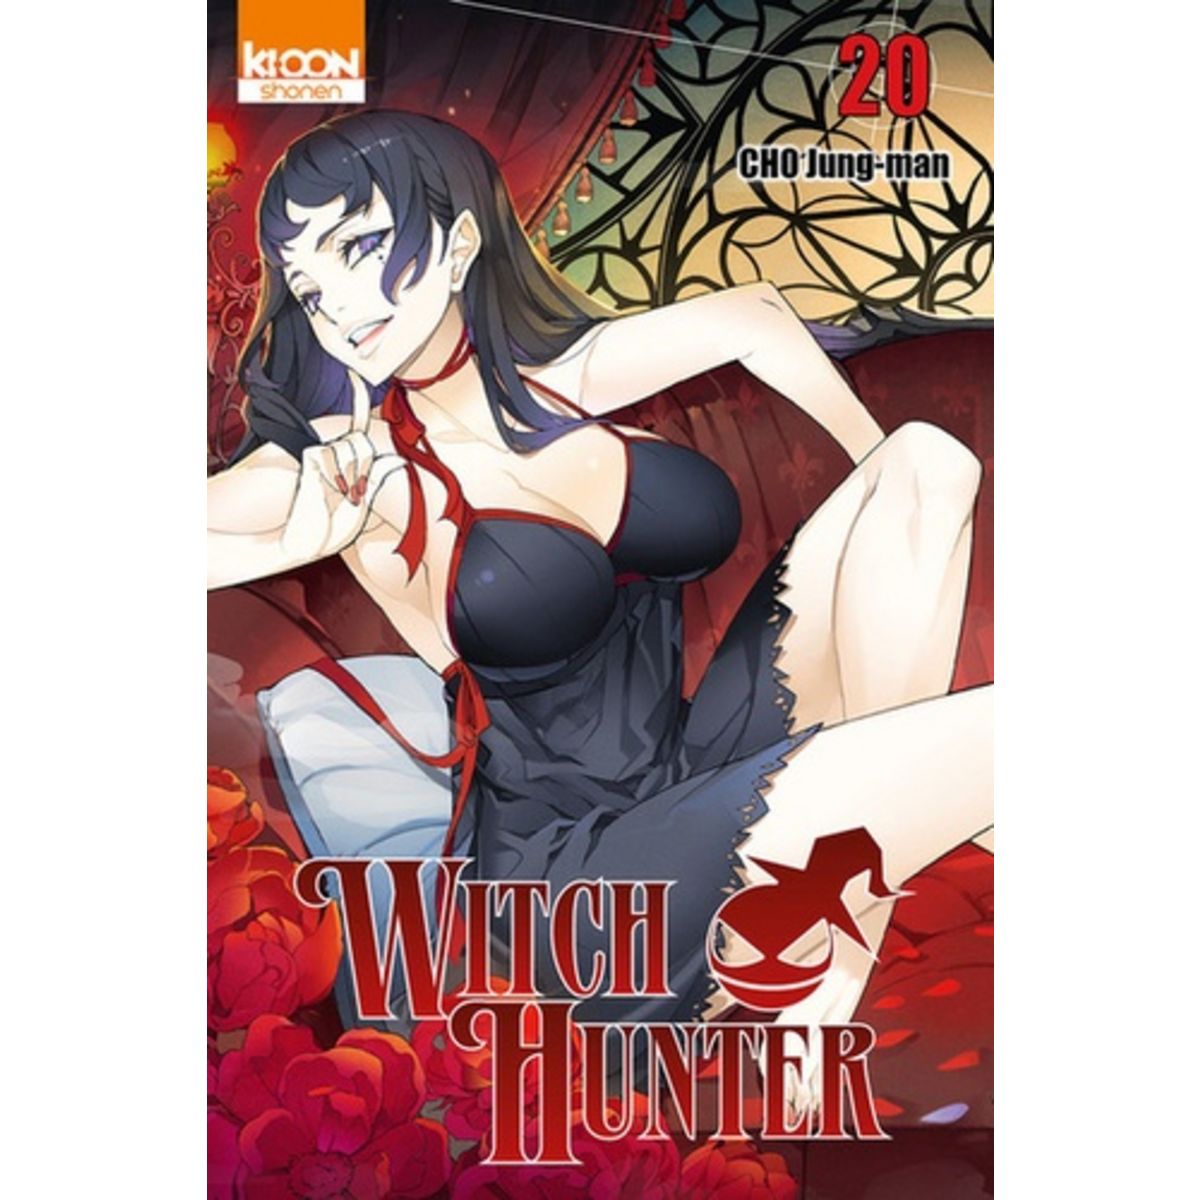  WITCH HUNTER TOME 20 , Cho Jung-man